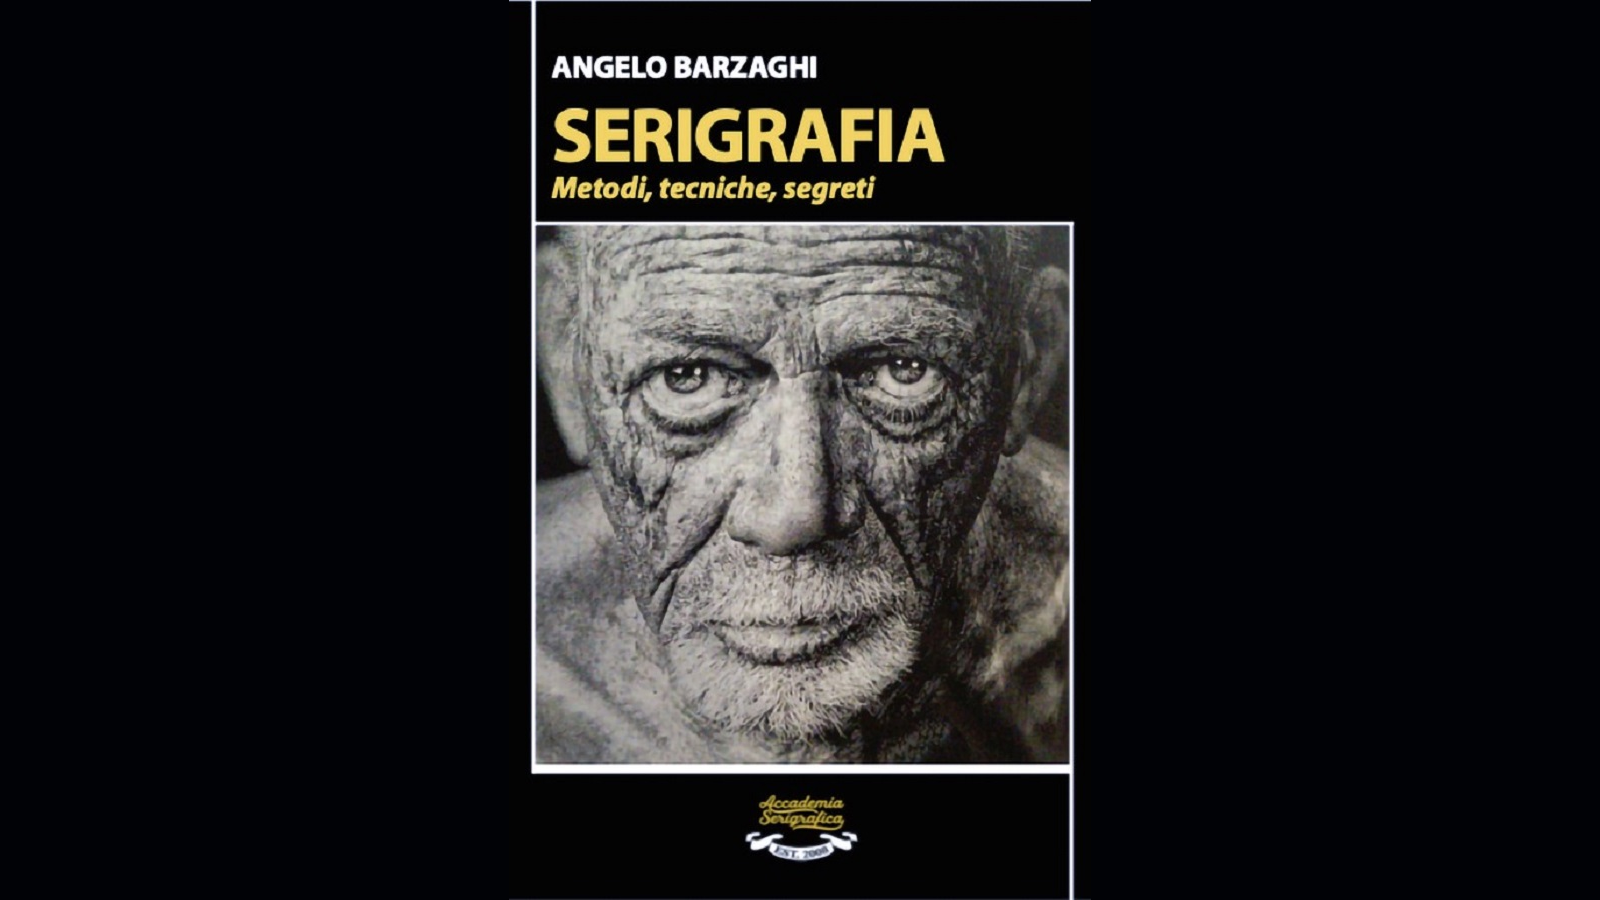 <h3>The book “Serigrafia” is distributed just in these days</h3>
